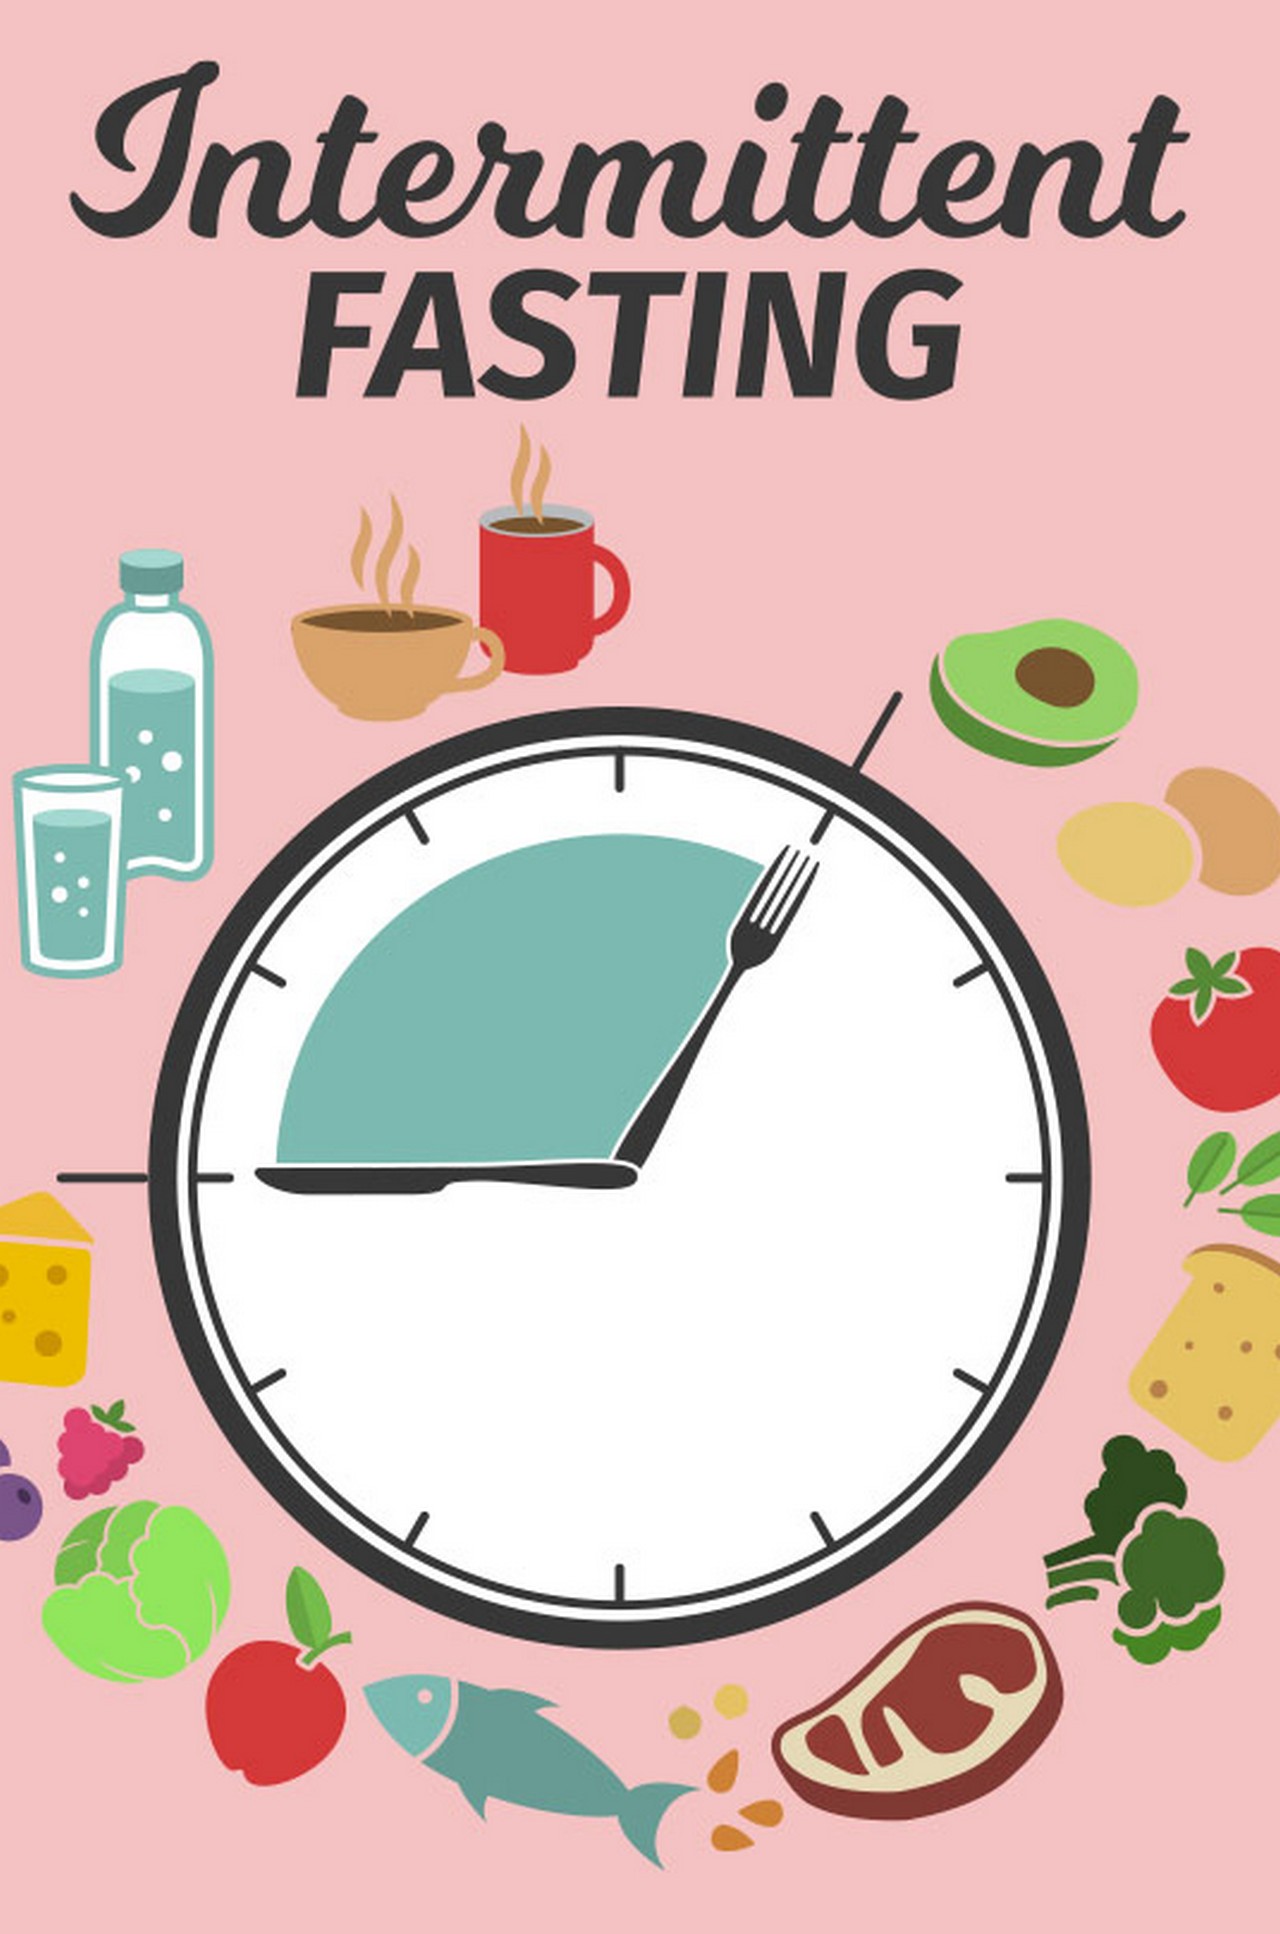  Intermittent Fasting: What Is It And How Does It Work?